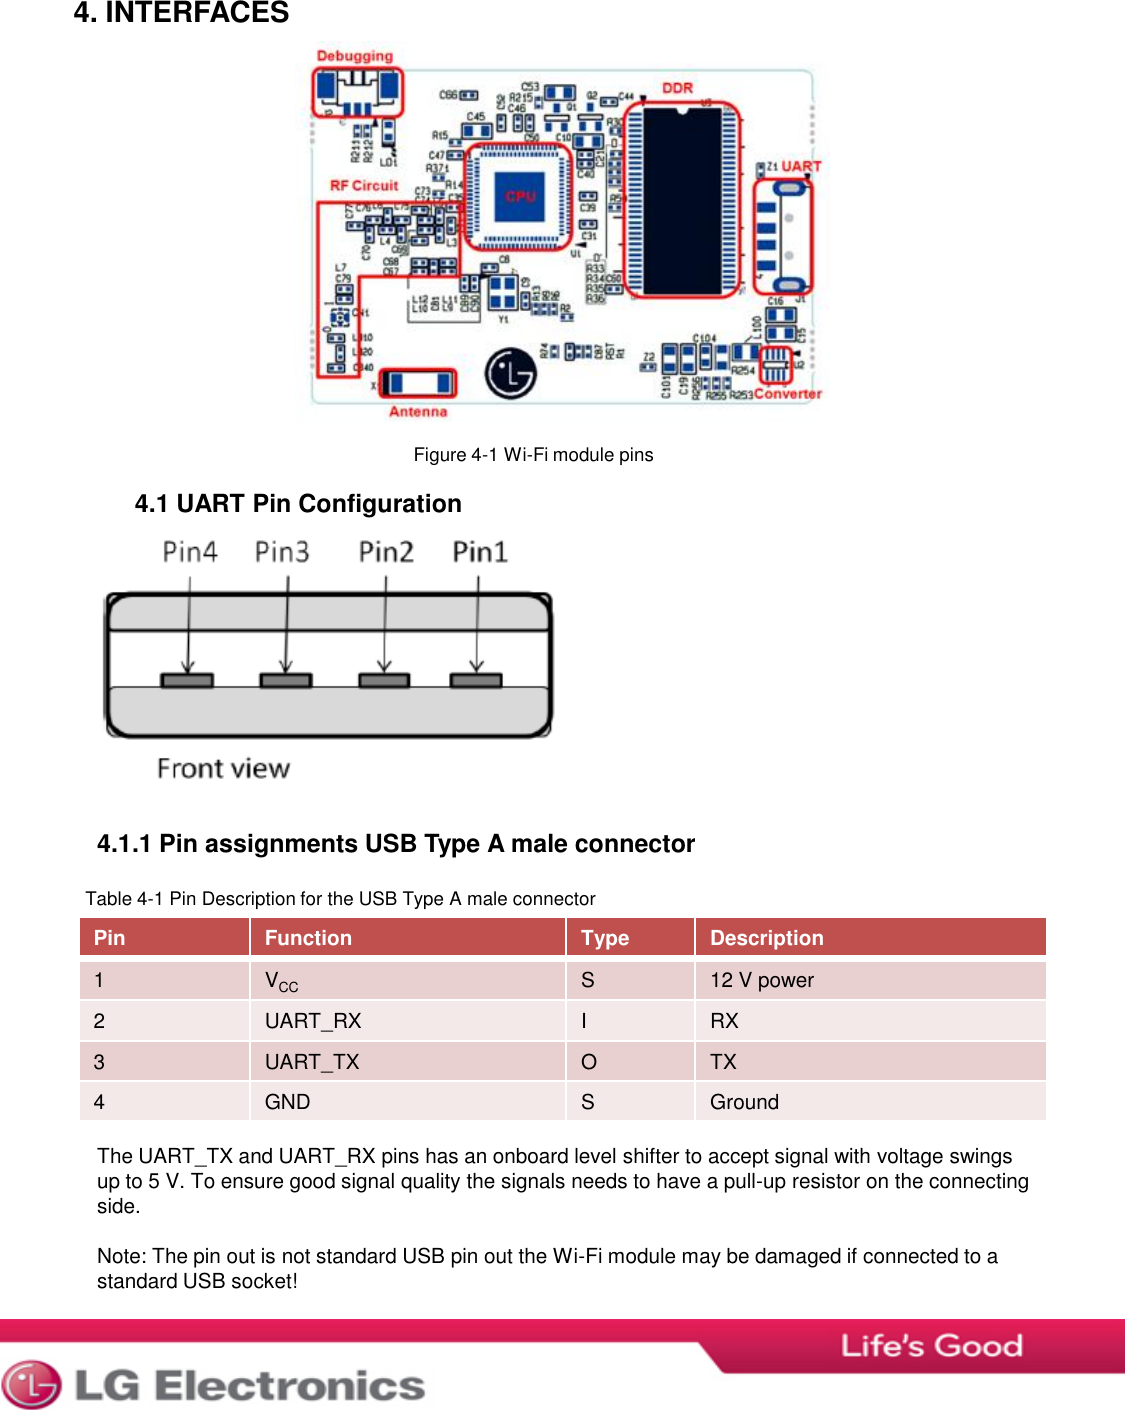 4. INTERFACES Figure 4-1 Wi-Fi module pins 4.1 UART Pin Configuration 4.1.1 Pin assignments USB Type A male connector Table 4-1 Pin Description for the USB Type A male connector The UART_TX and UART_RX pins has an onboard level shifter to accept signal with voltage swings  up to 5 V. To ensure good signal quality the signals needs to have a pull-up resistor on the connecting side.   Note: The pin out is not standard USB pin out the Wi-Fi module may be damaged if connected to a  standard USB socket!  Pin Function Type Description 1 VCC S 12 V power 2 UART_RX I RX 3 UART_TX O TX 4 GND S Ground 